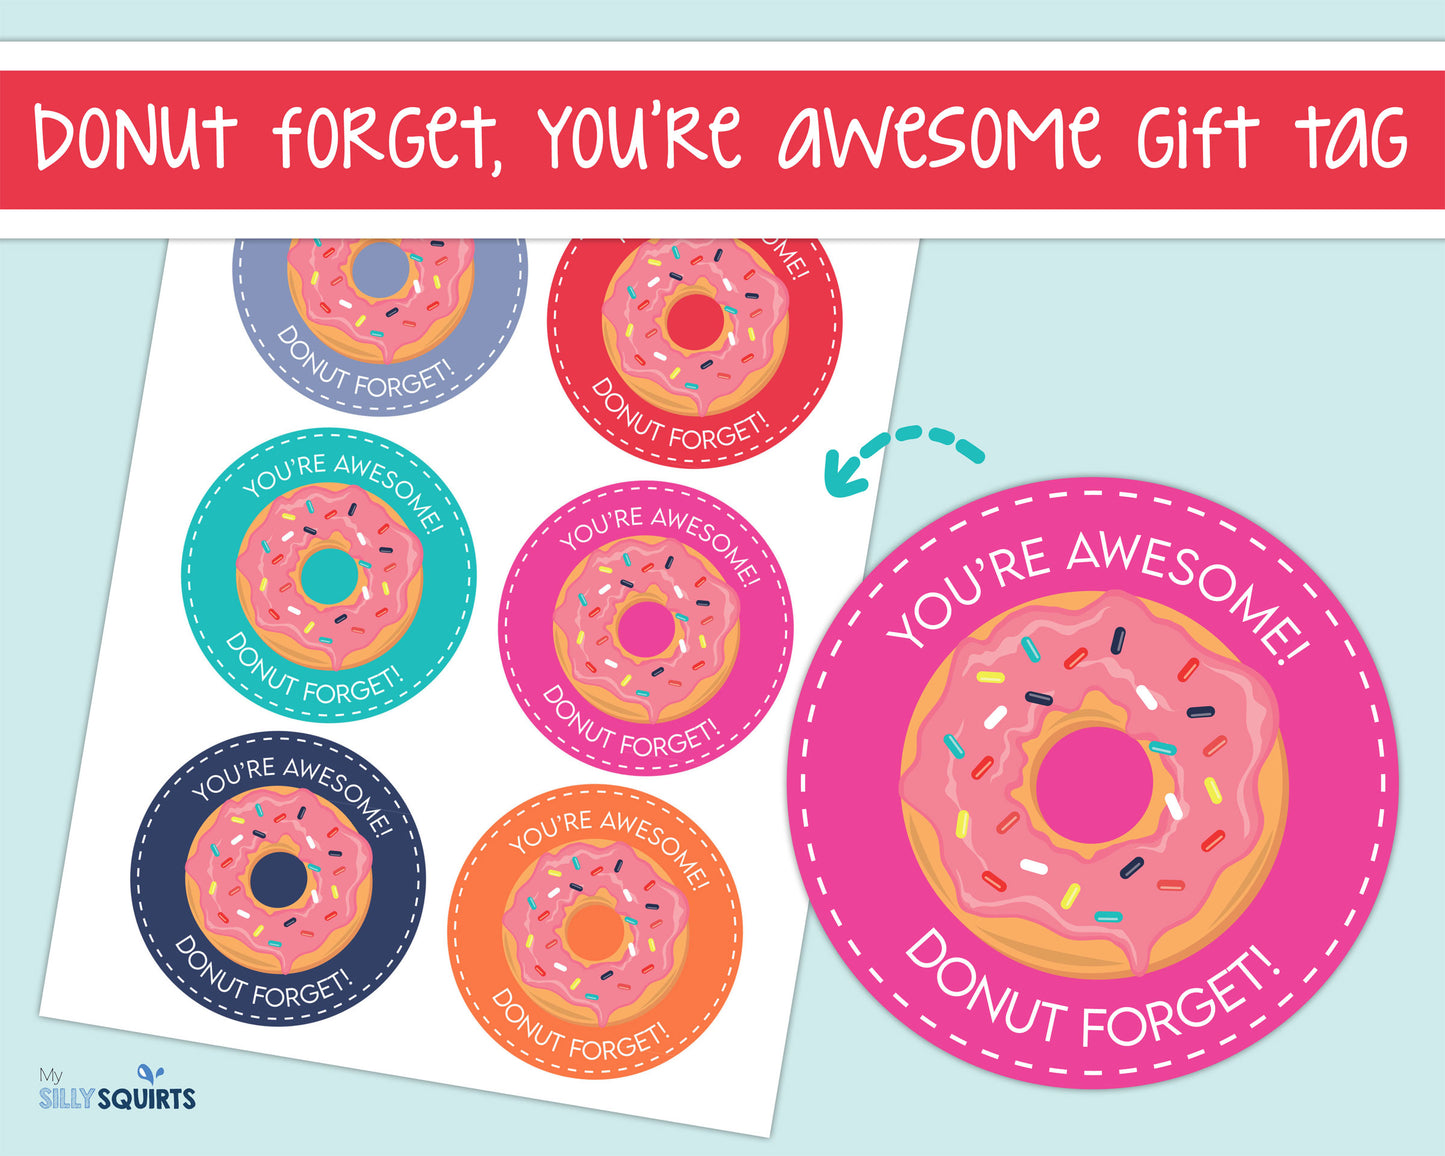 Donut Forget You're Awesome gift tag